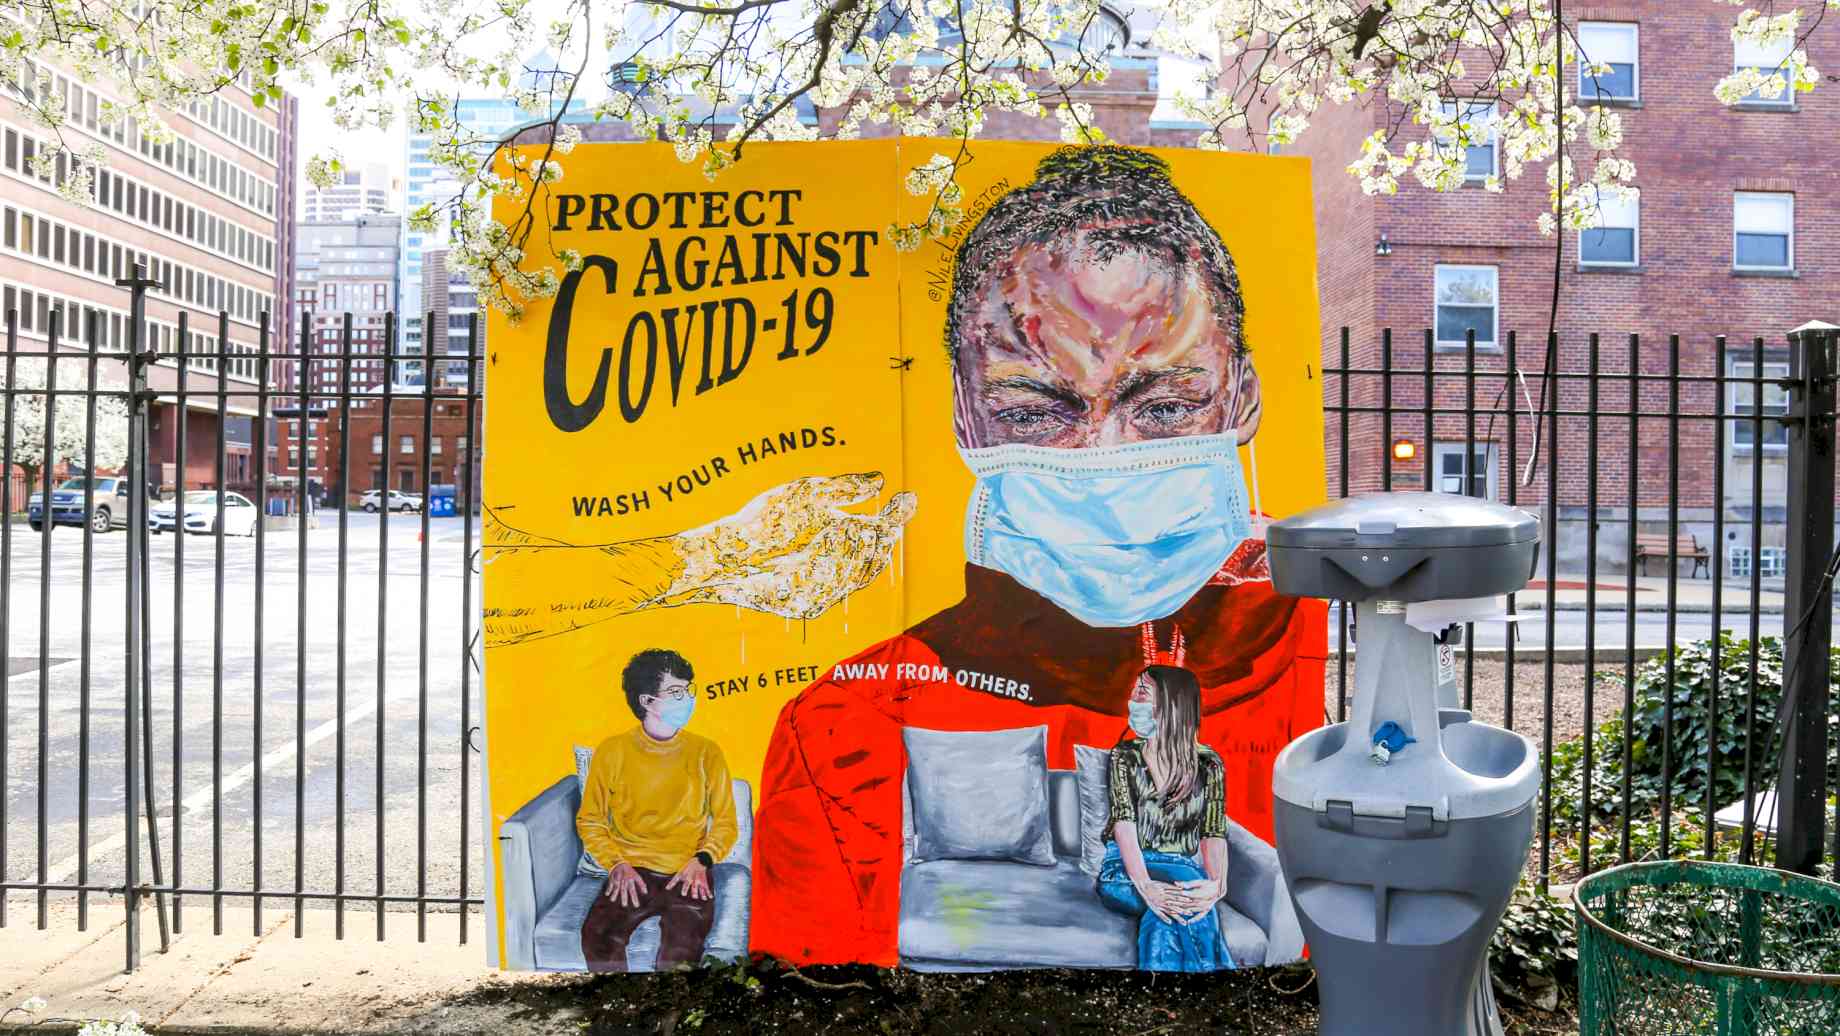 Philadelphia’s Streets Dept has partnered with Broad Street Ministry, Mural Arts Philadelphia, HAHA MAG, and four regular Streets Dept artists to create and install a series of eye-catching and informative hand washing stations around the city of Philadelphia. Photo credit: Streets Dept, reproduced from https://streetsdept.com/2020/03/24/philadelphians-install-covid-19-hand-washing-mural-stations-around-the-city/